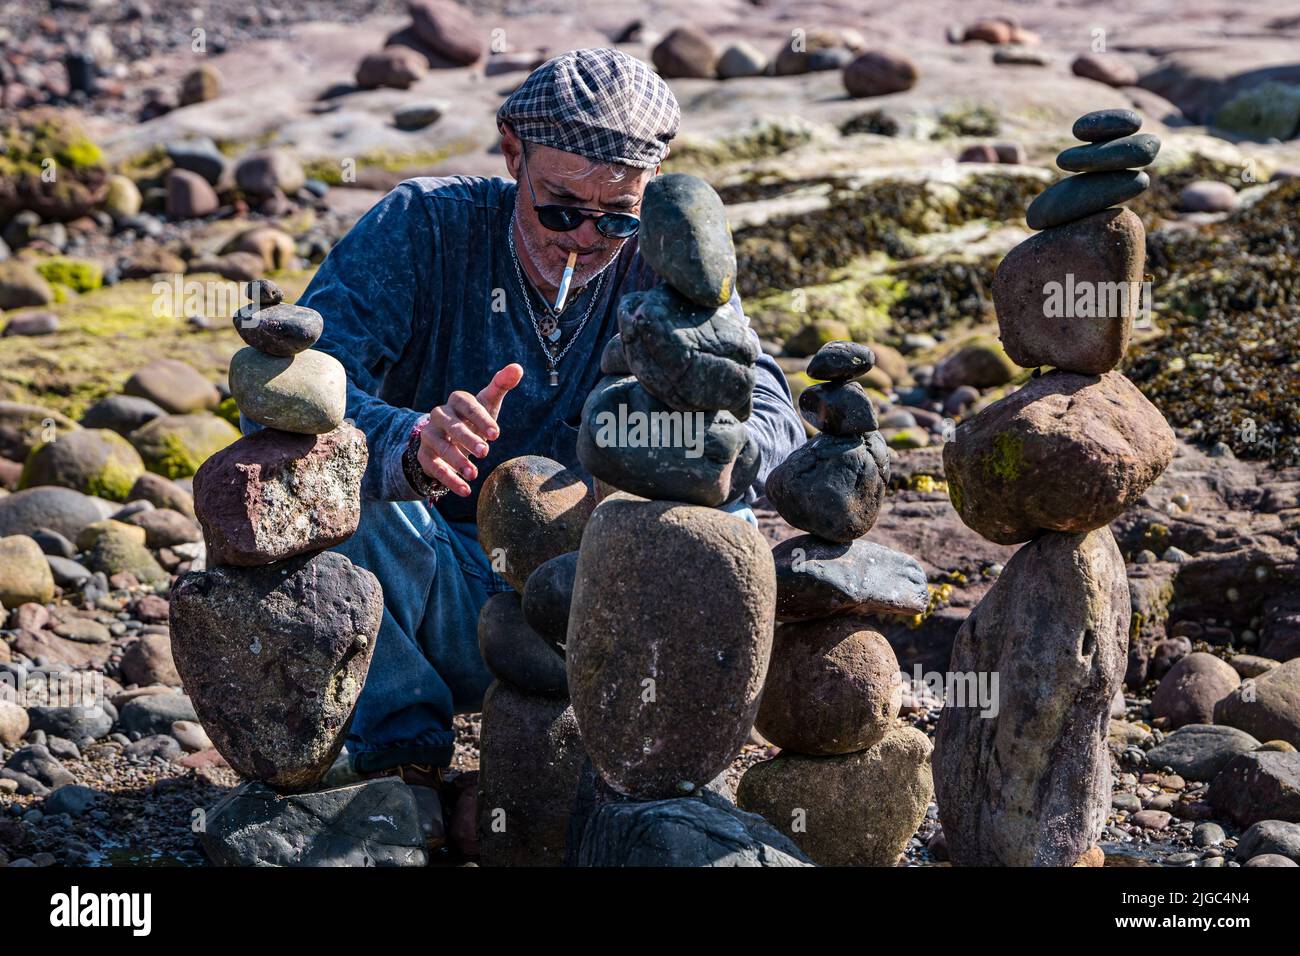 Dunbar, East Lothian, Scotland, UK, 9th July 2022. European Stone Stacking Championship: participants from all over the world have 3.5 hours to create an artistic artwork from the rocks on Eye Cave Beach. Pictured: Charlie Jordan from Texas. Credit: Sally Anderson/Alamy Live News Stock Photo